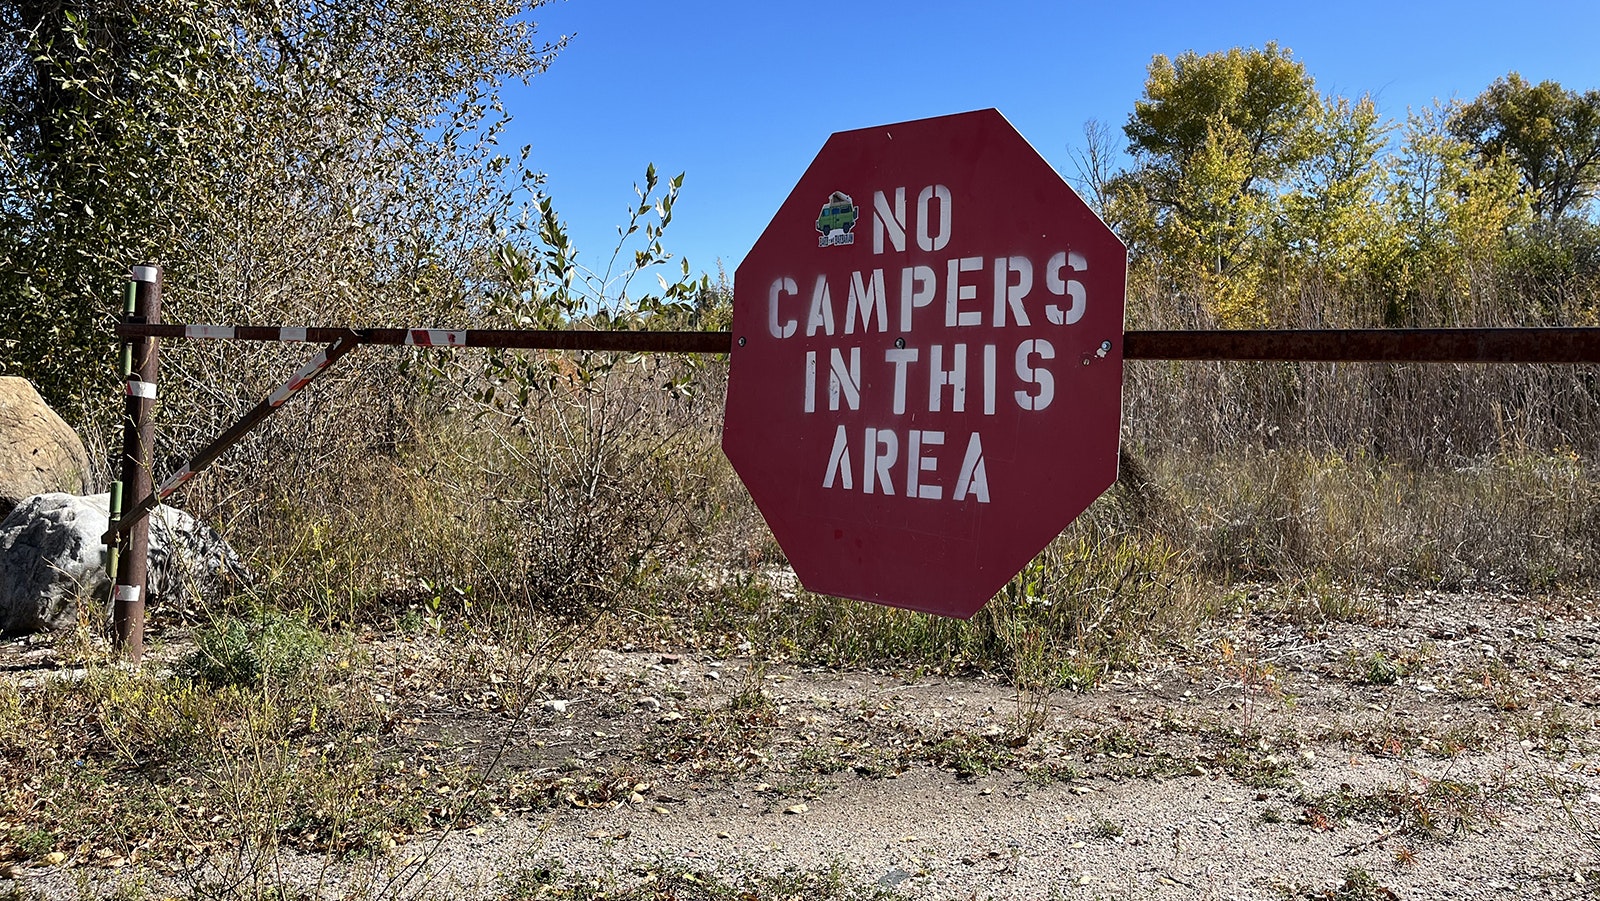 Camping free of charge is allowed in parts of Lander City Park. The City Council is debating the question of whether free camping is unfair competition with local businesses.